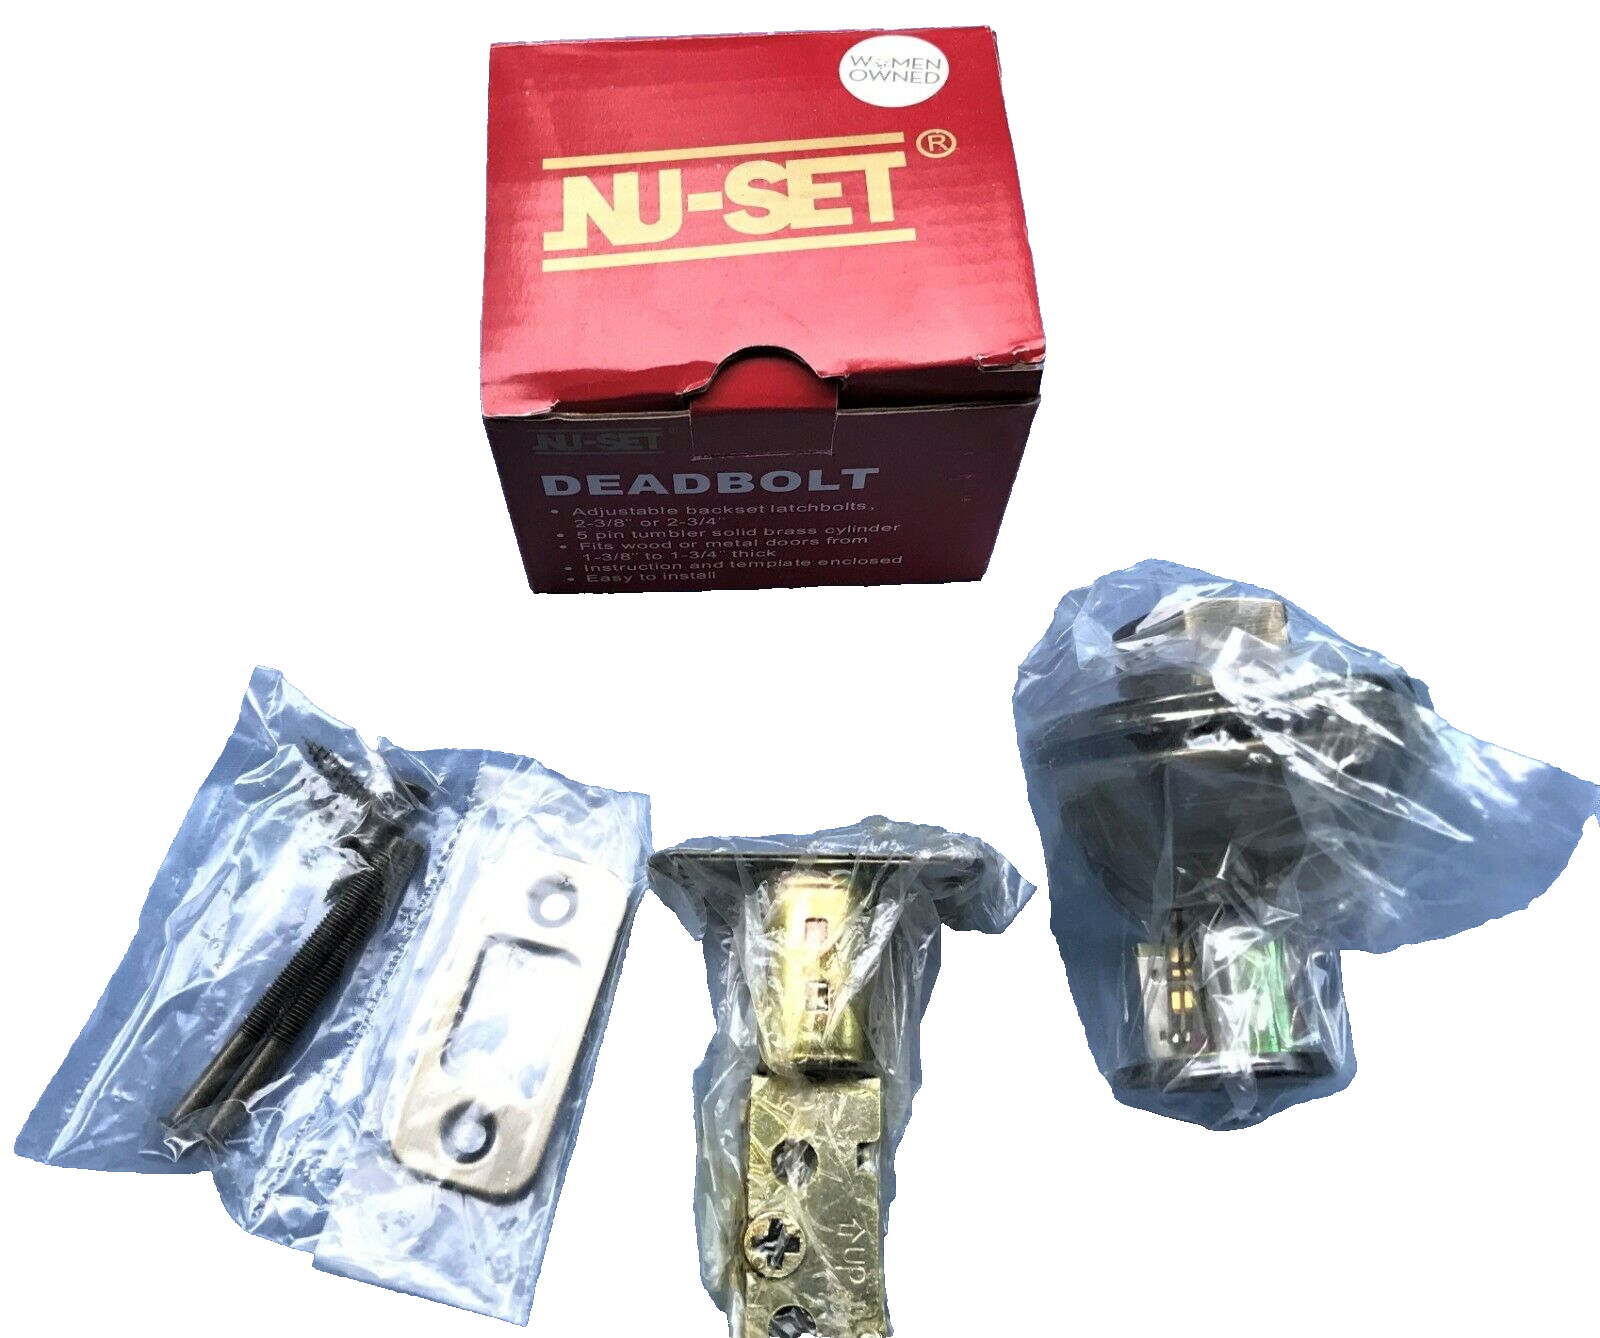 Primary image for 1 NU-SET Contractor Deadbolt lock, code to 13525. two keys- Home Security